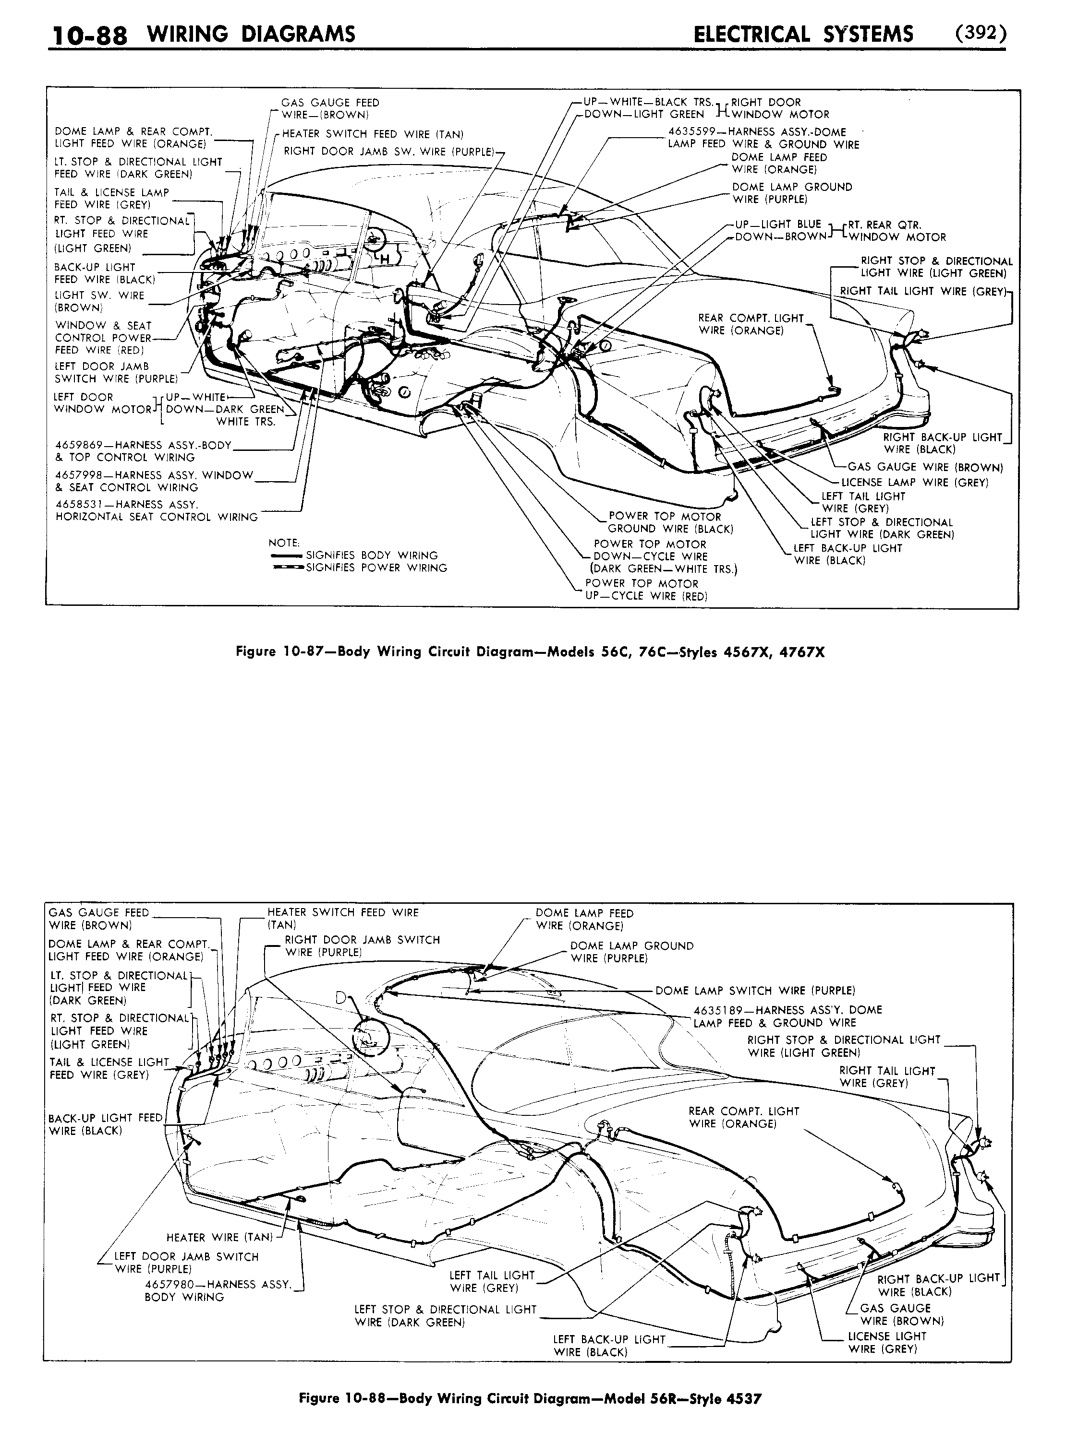 n_11 1955 Buick Shop Manual - Electrical Systems-088-088.jpg